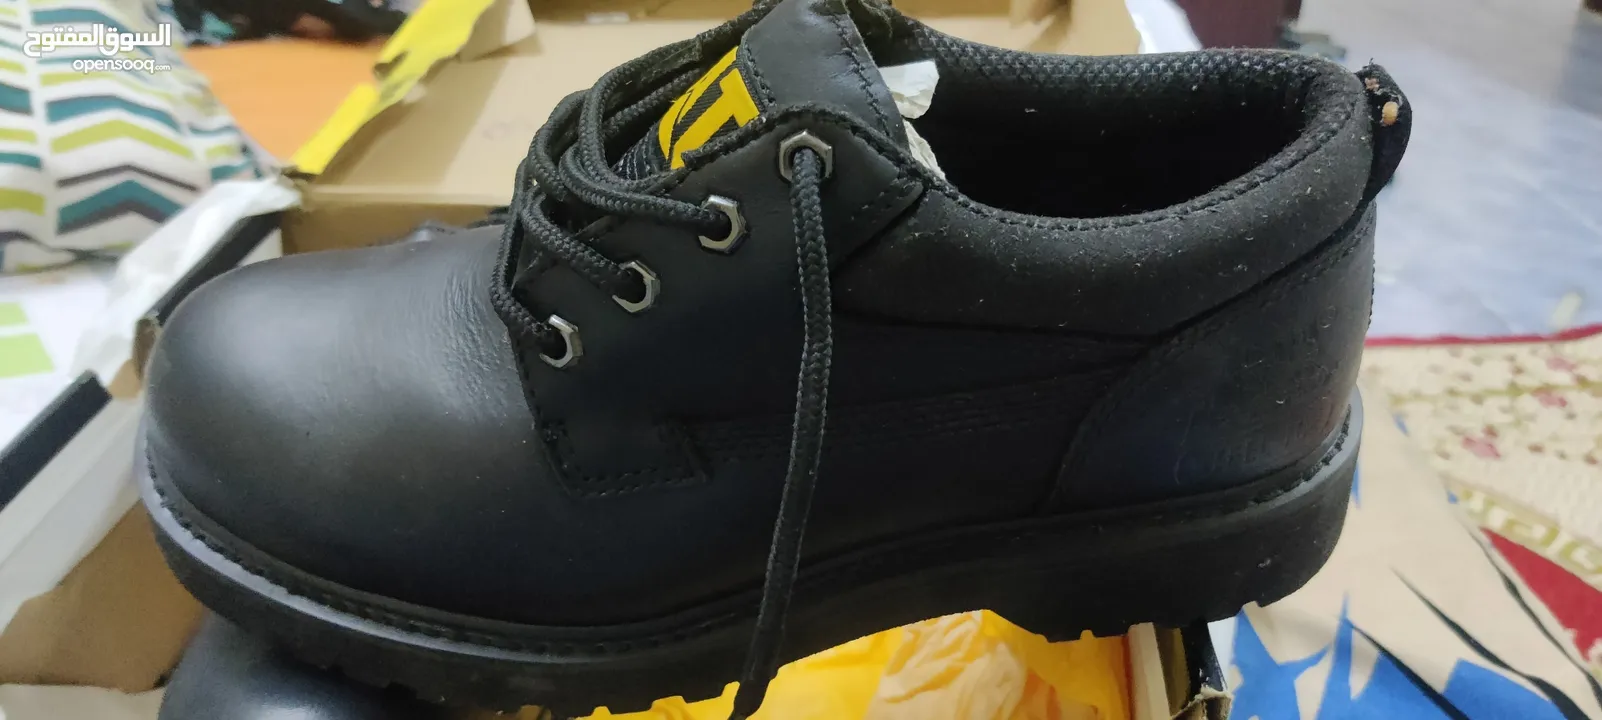 CAT SAFETY SHOES